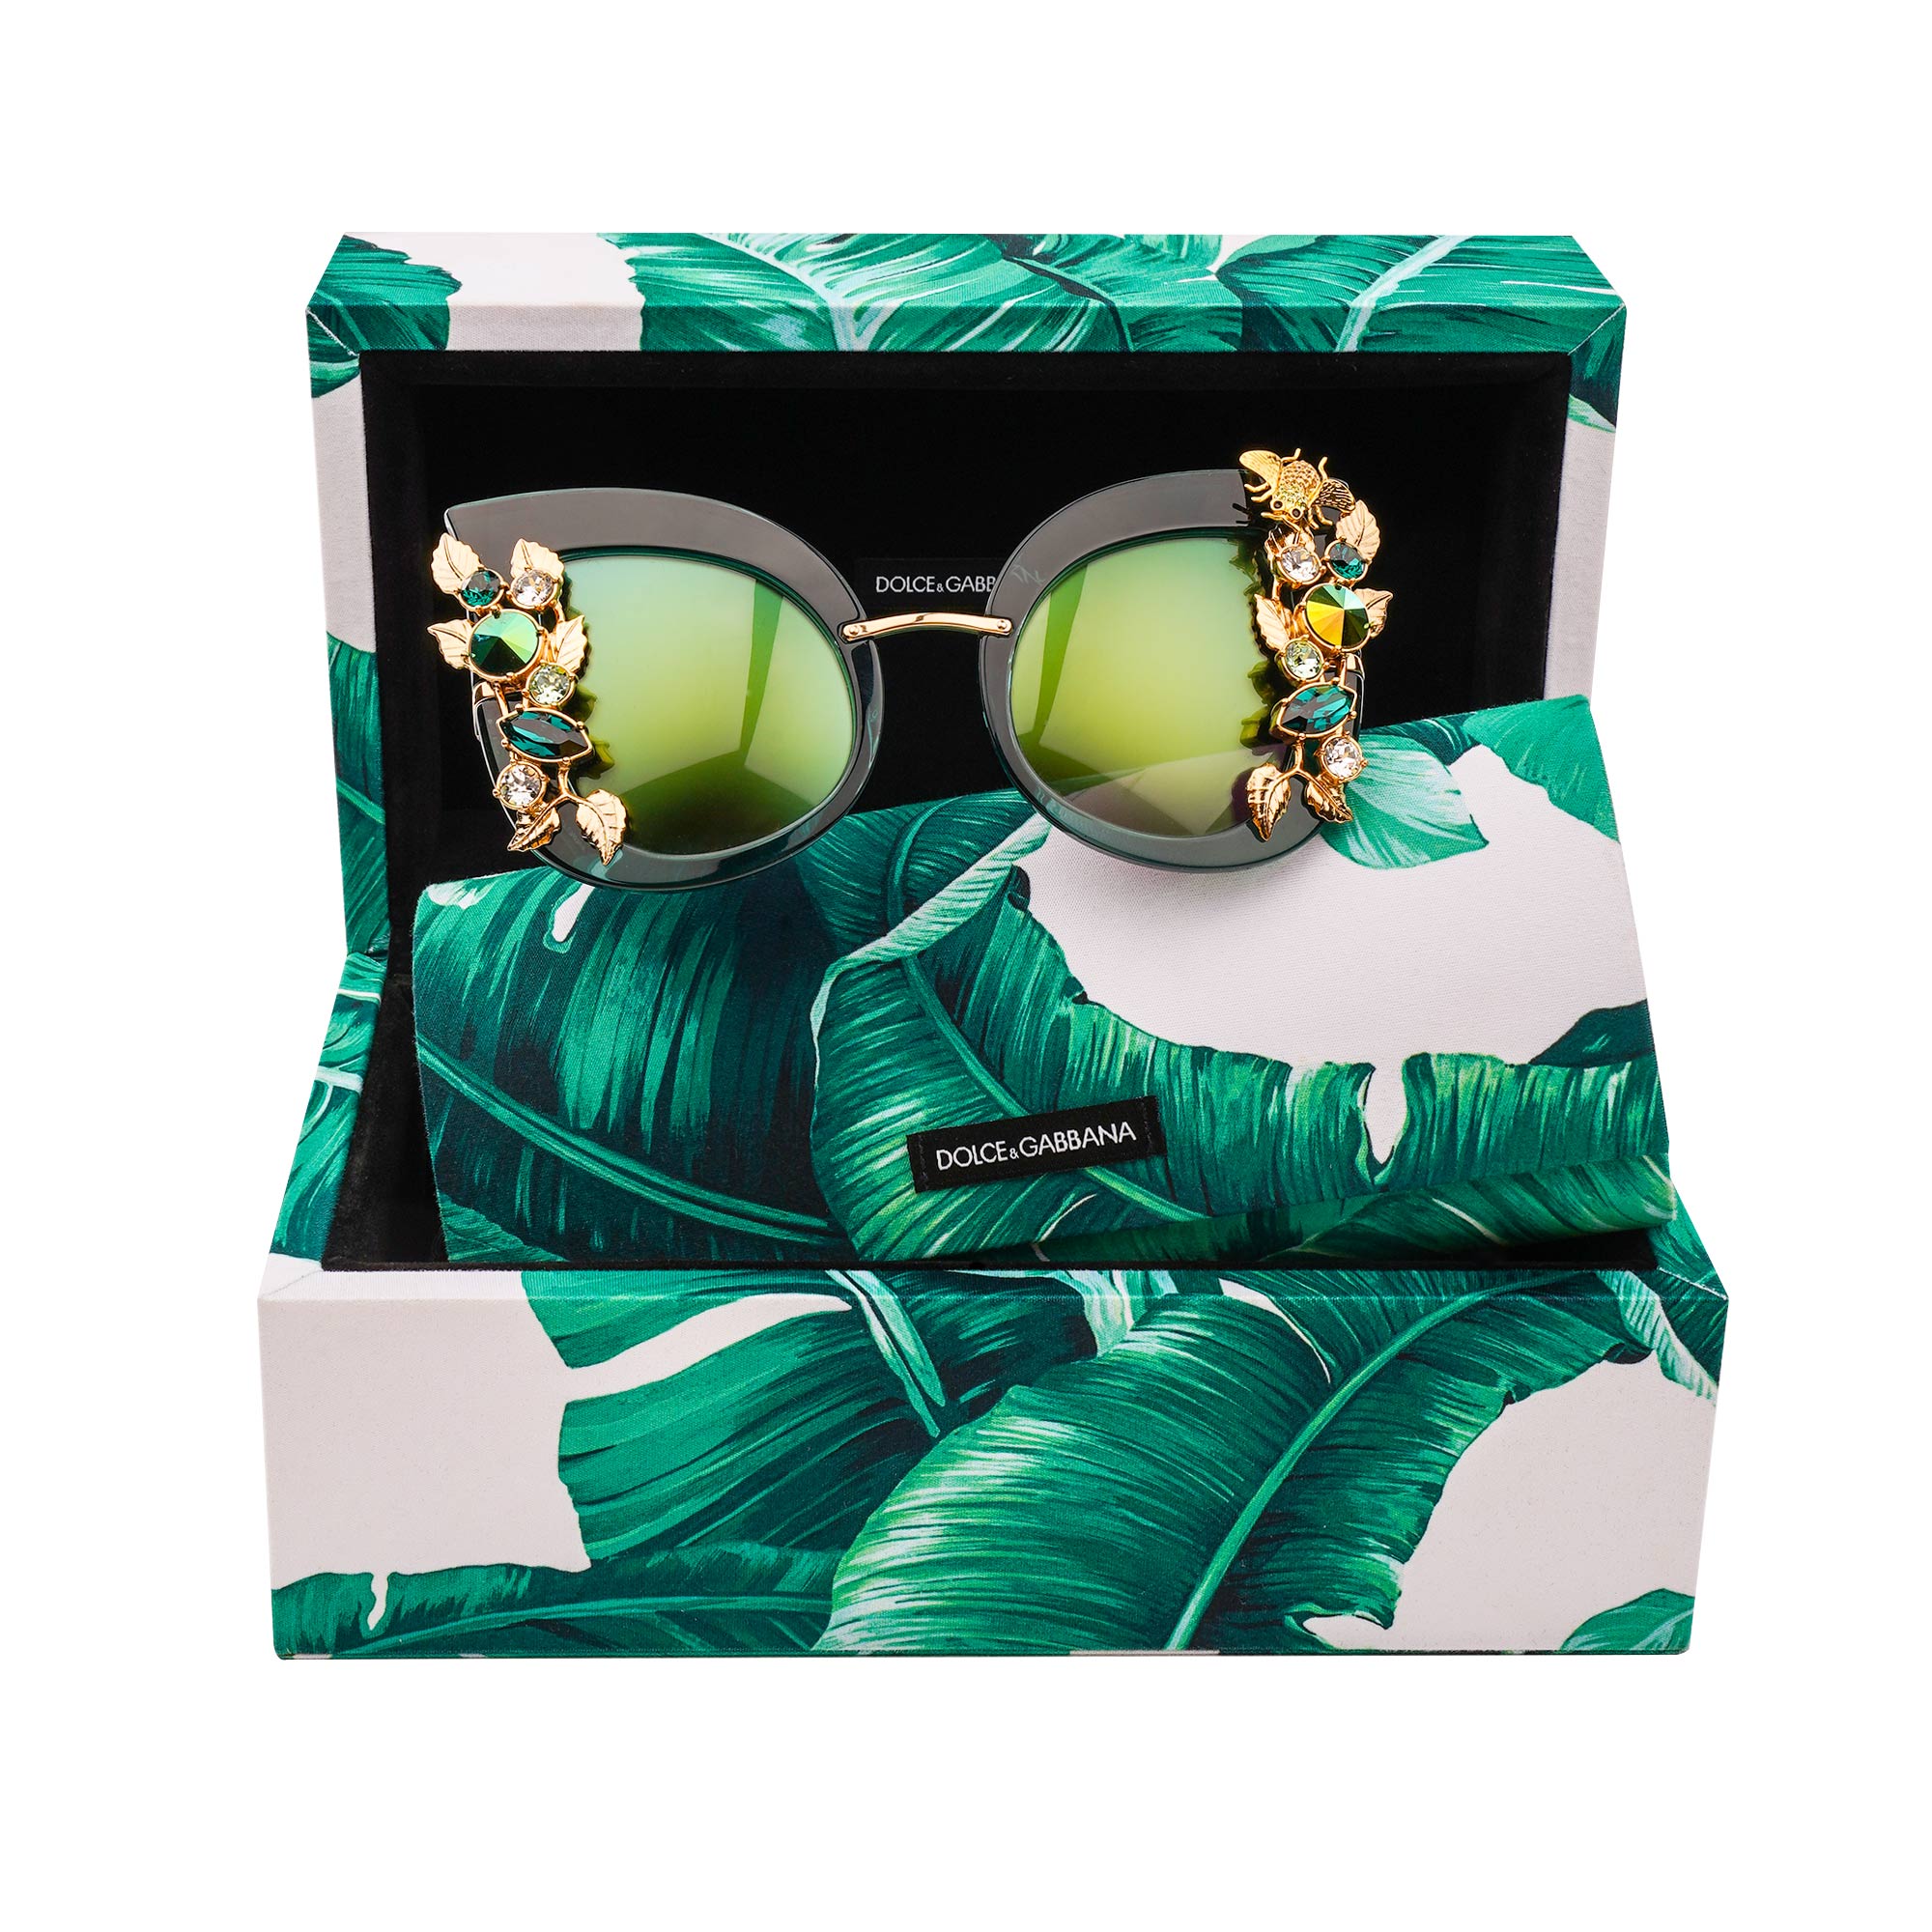 Dolce & Gabbana Special Edition Butterfly Sunglasses DG4293 with Crystals  and Leafs Green | FASHION ROOMS